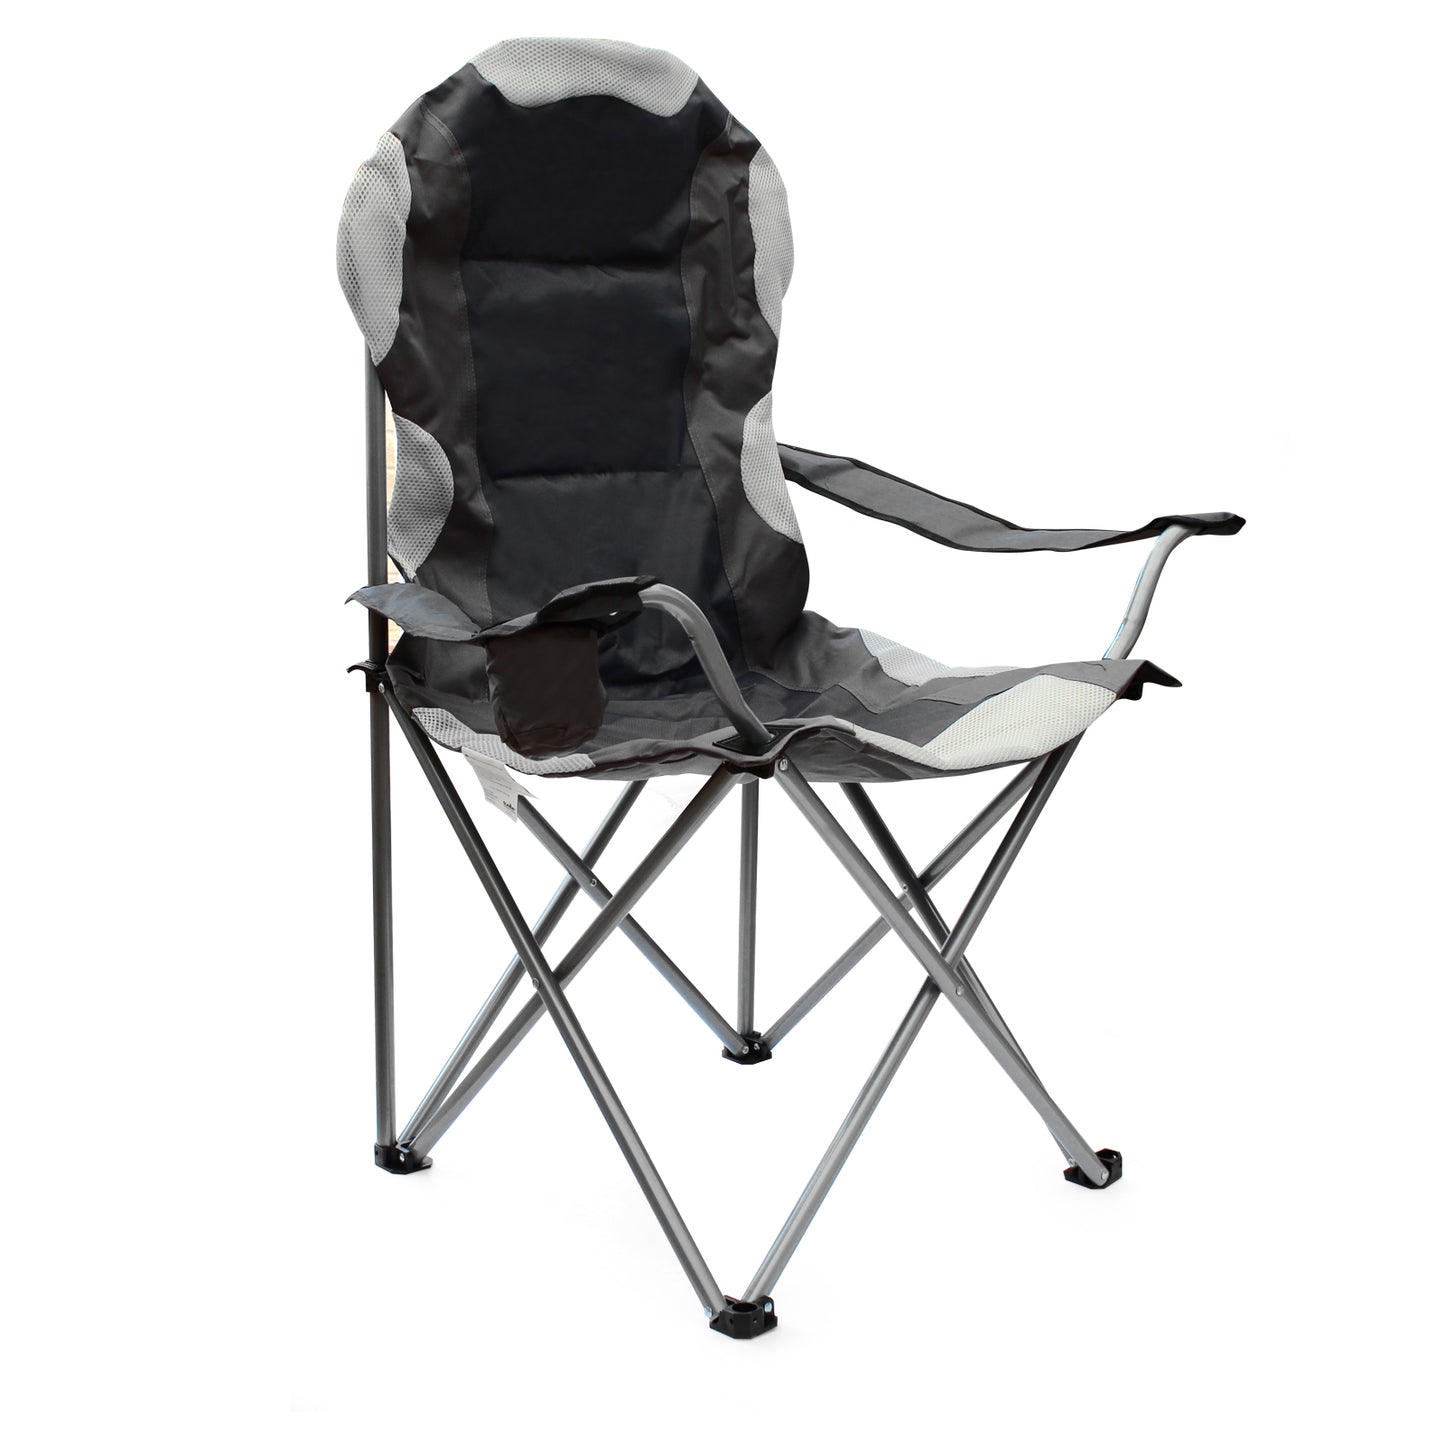 Berkley Padded Relaxer Armchair for Camping and Fishing